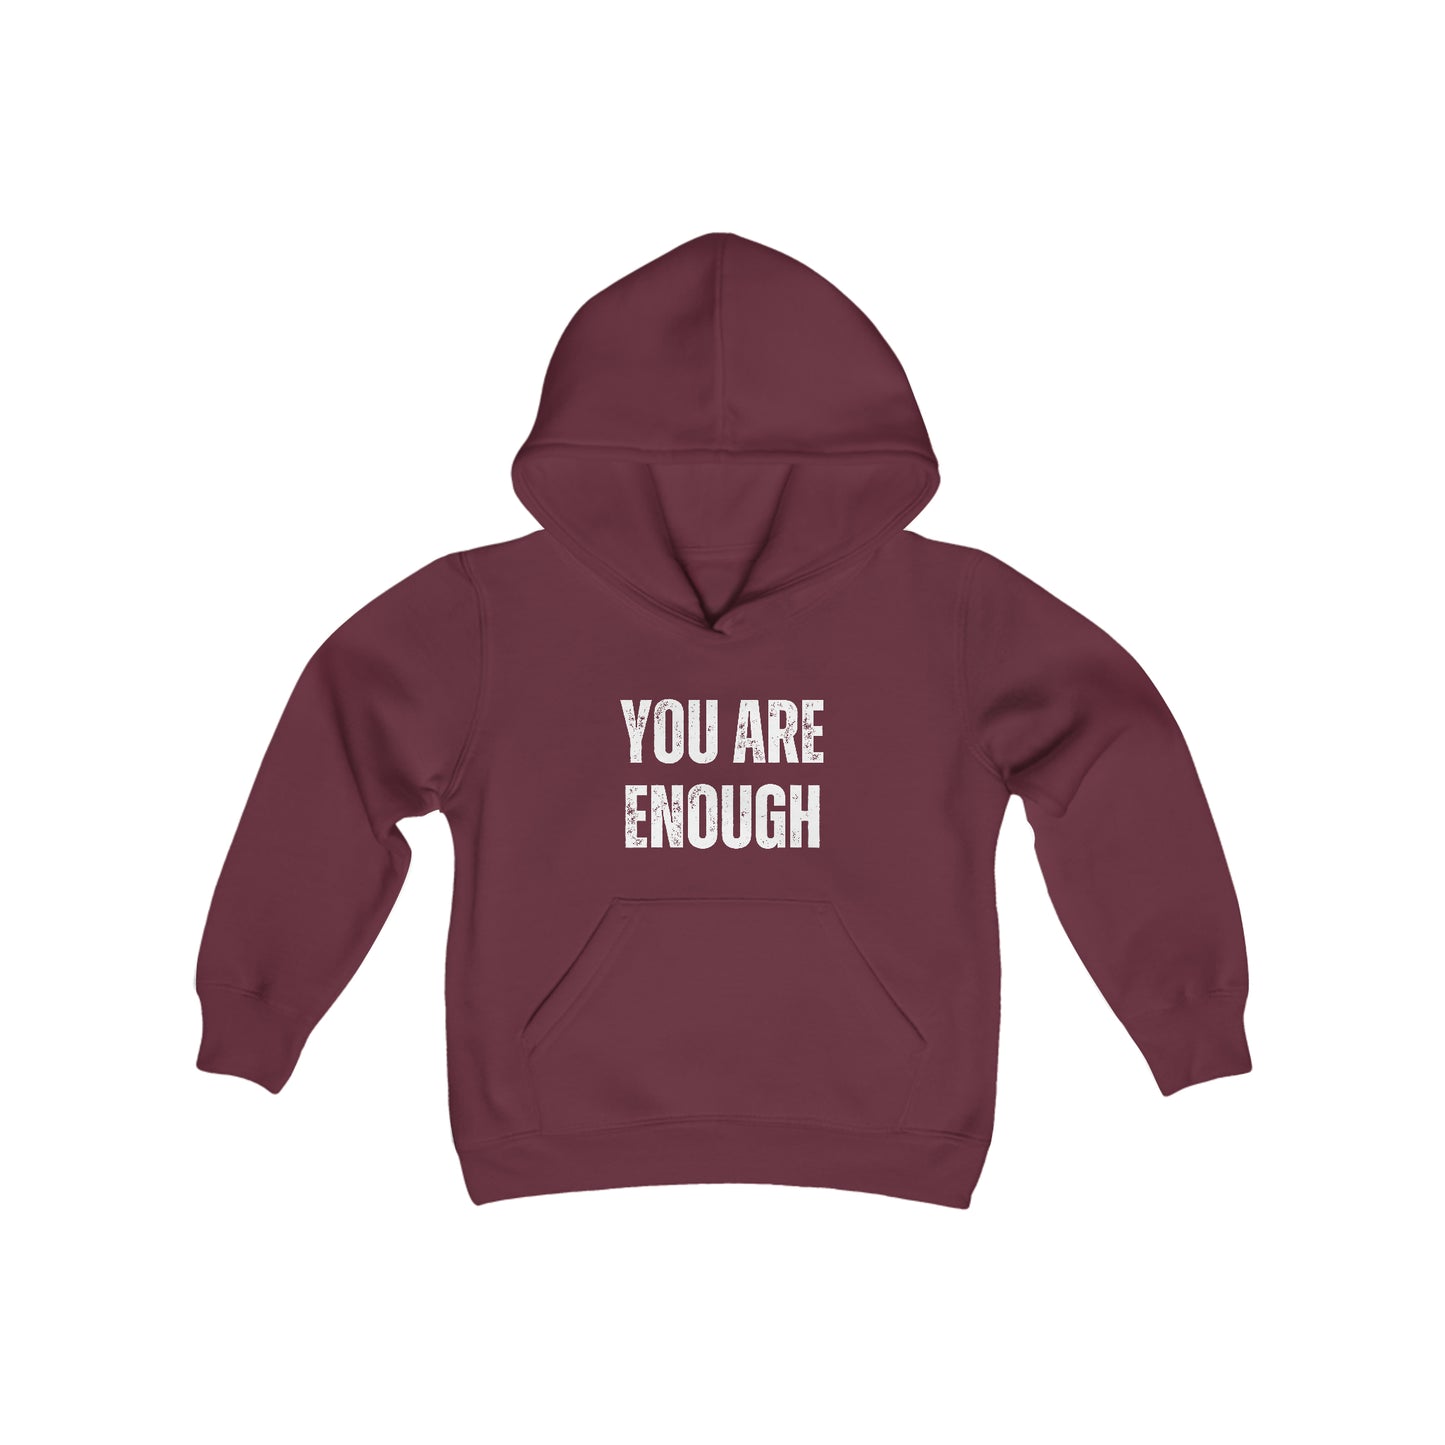 You Are Enough Youth Hooded Sweatshirt